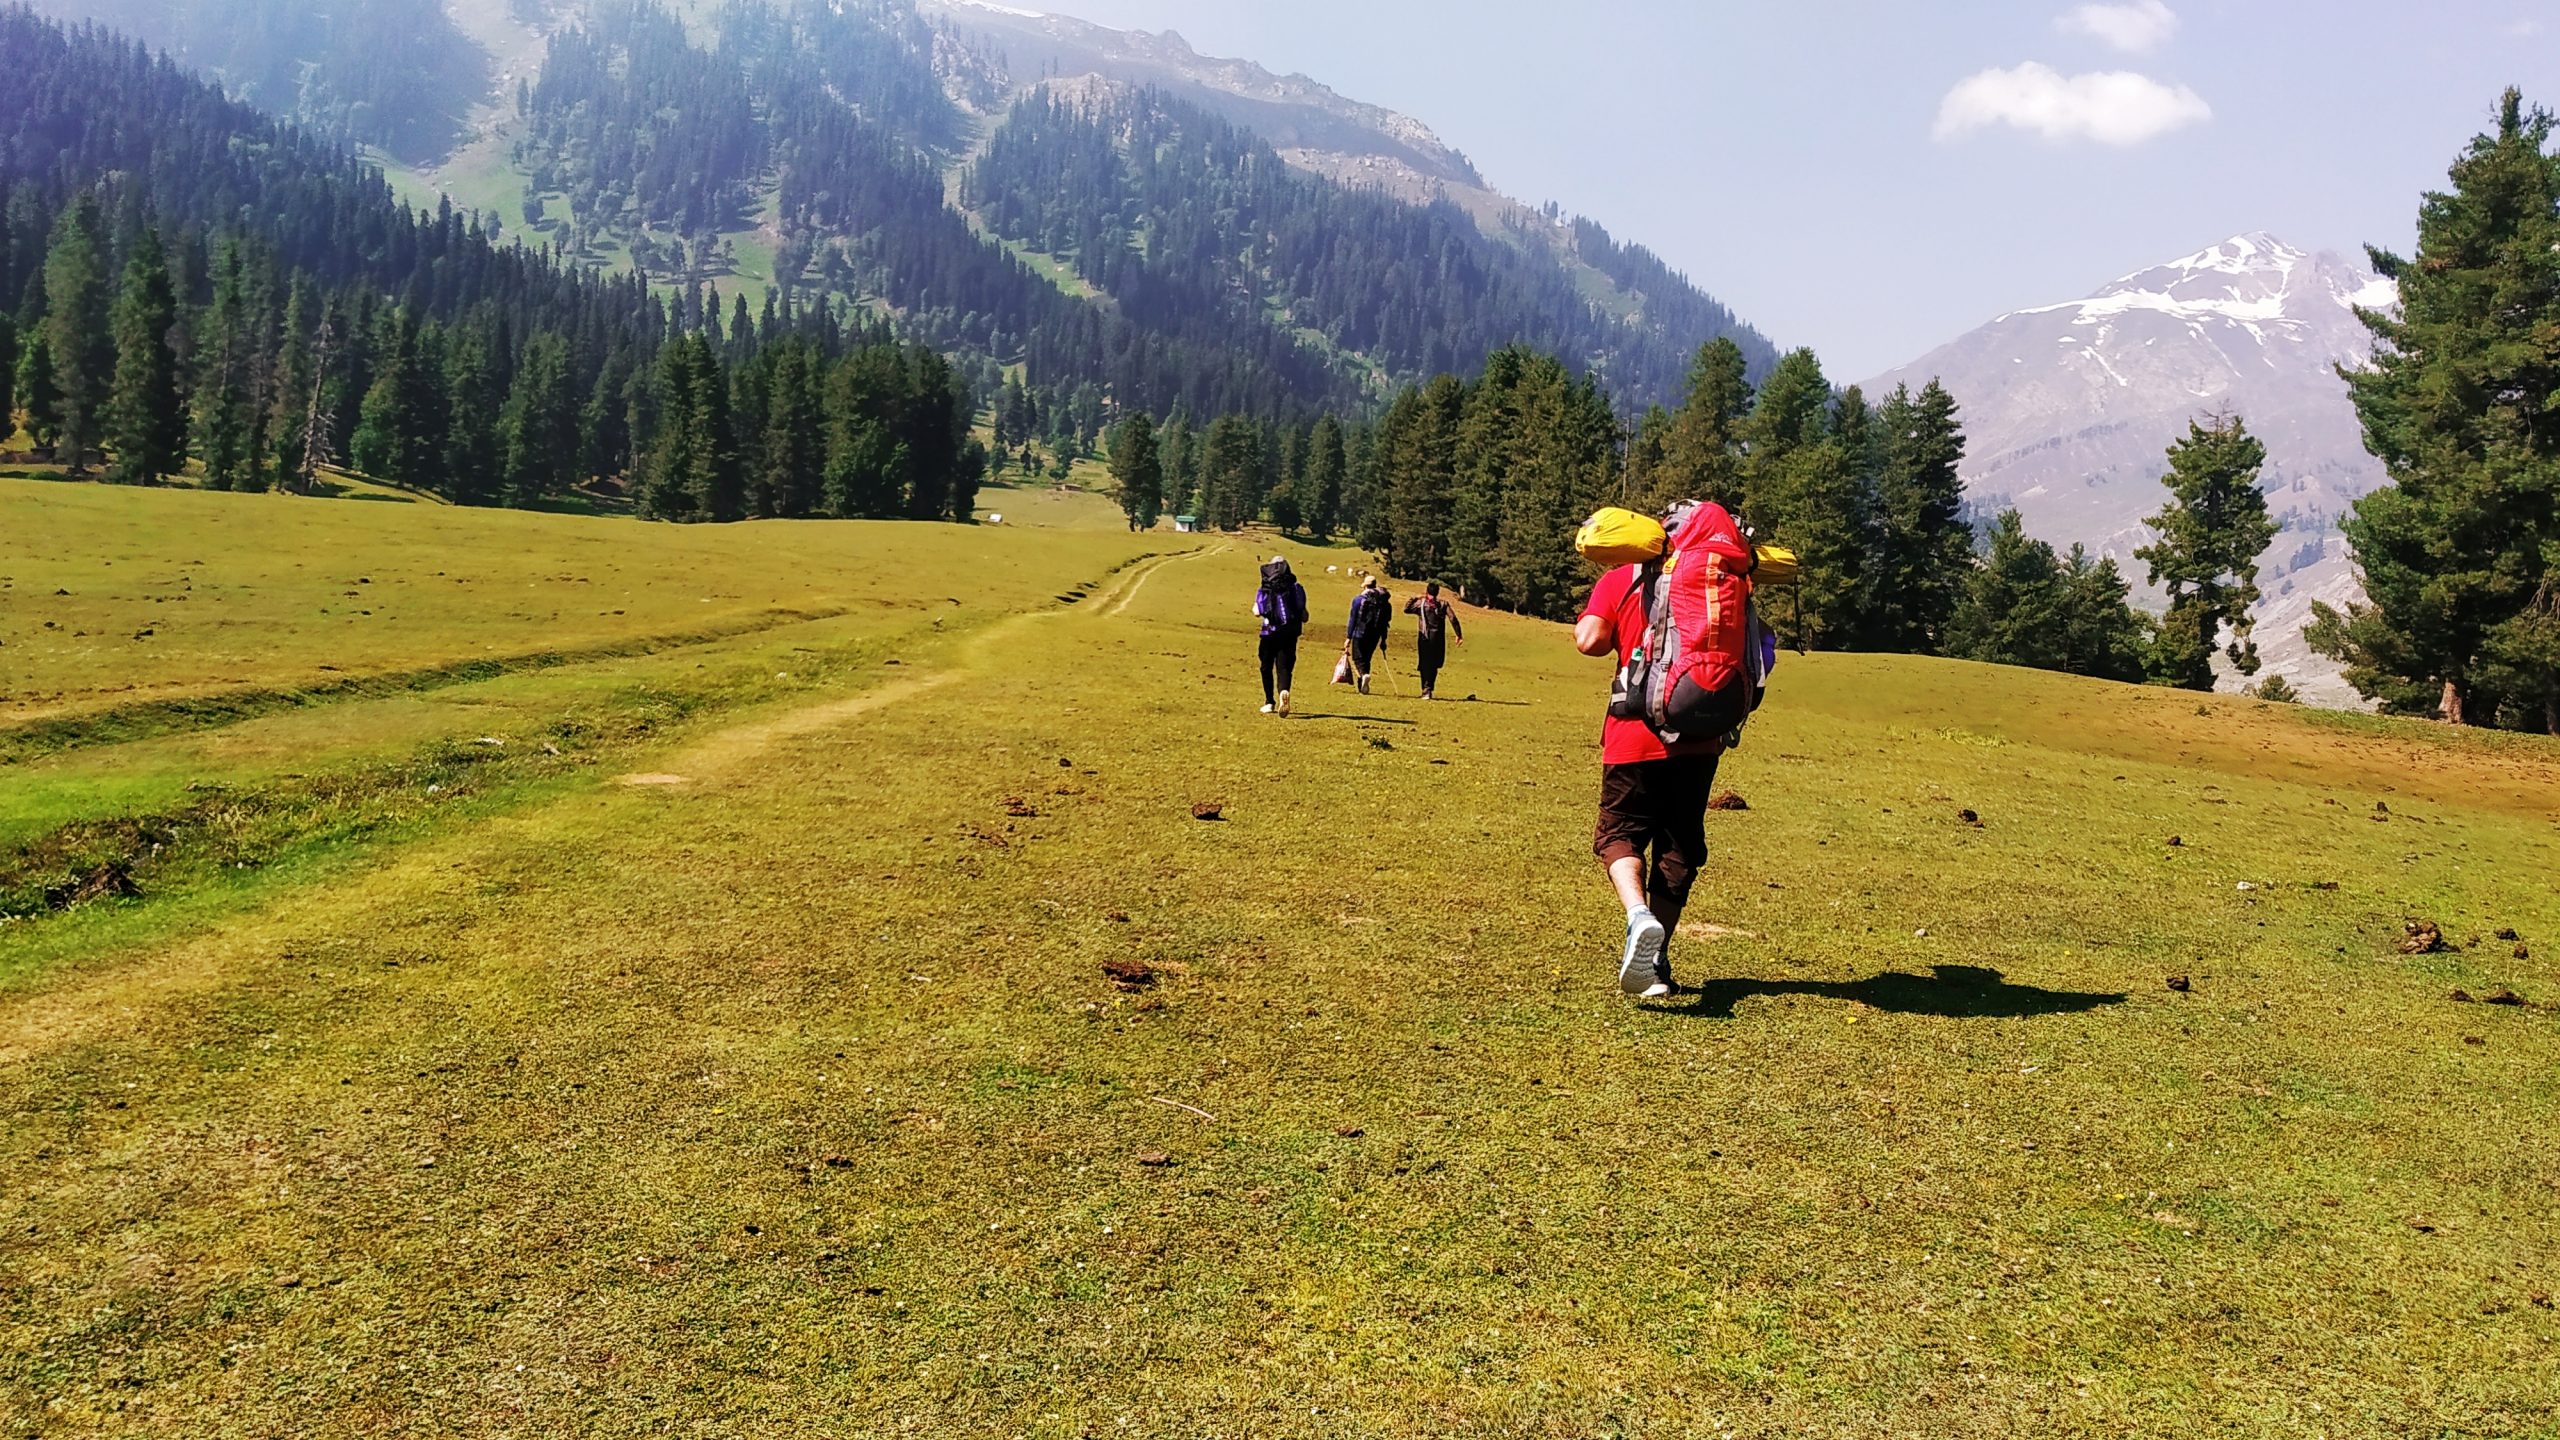 backpackers walking through a meadow